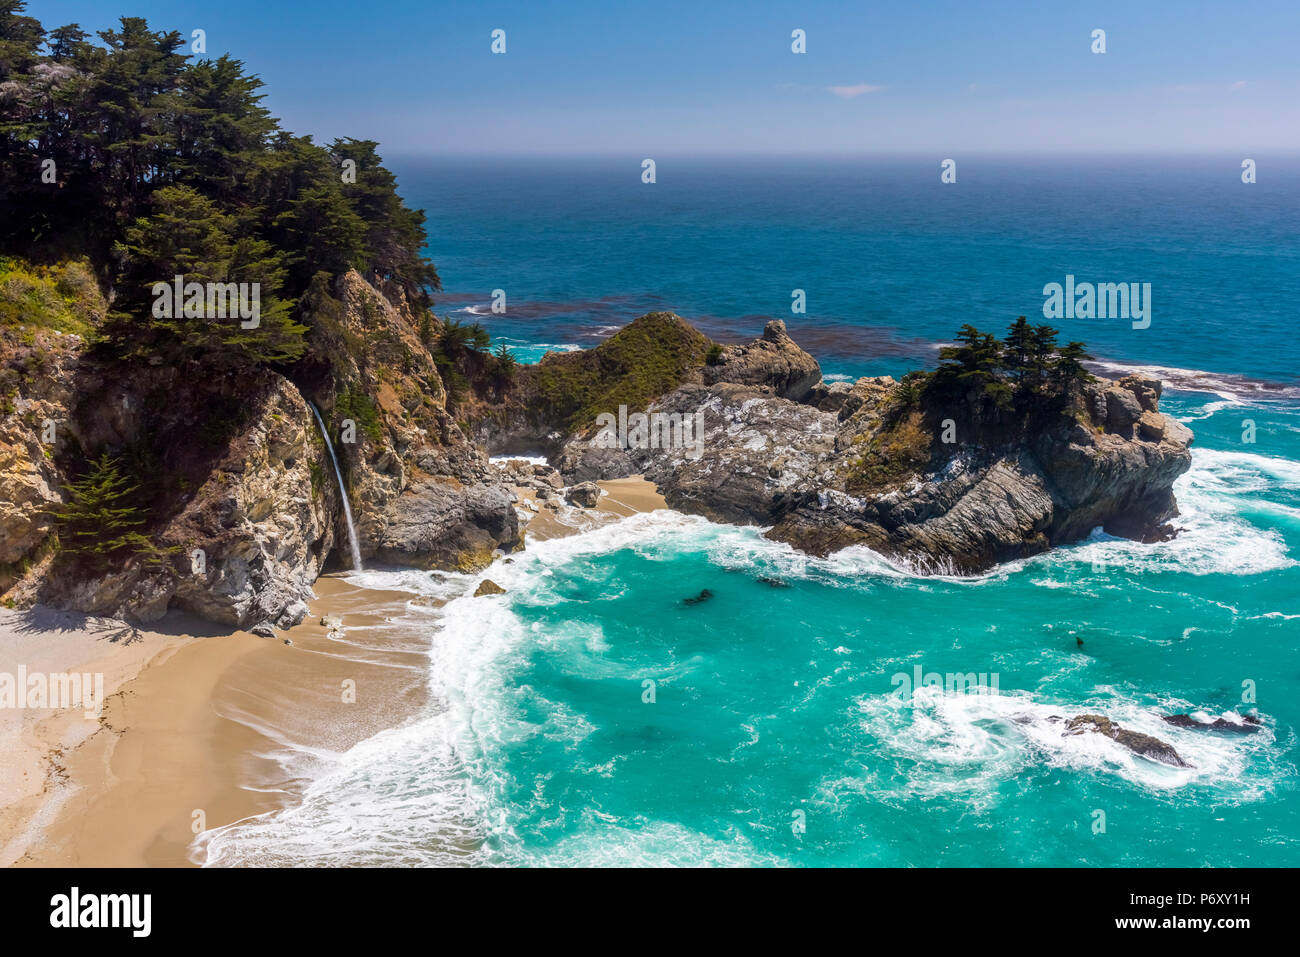 USA, California, Big Sur, Pacific Coast Highway (California State Route 1), Julia Pfeiffer Burns State Park, McWay Cove, McWay Falls Stock Photo